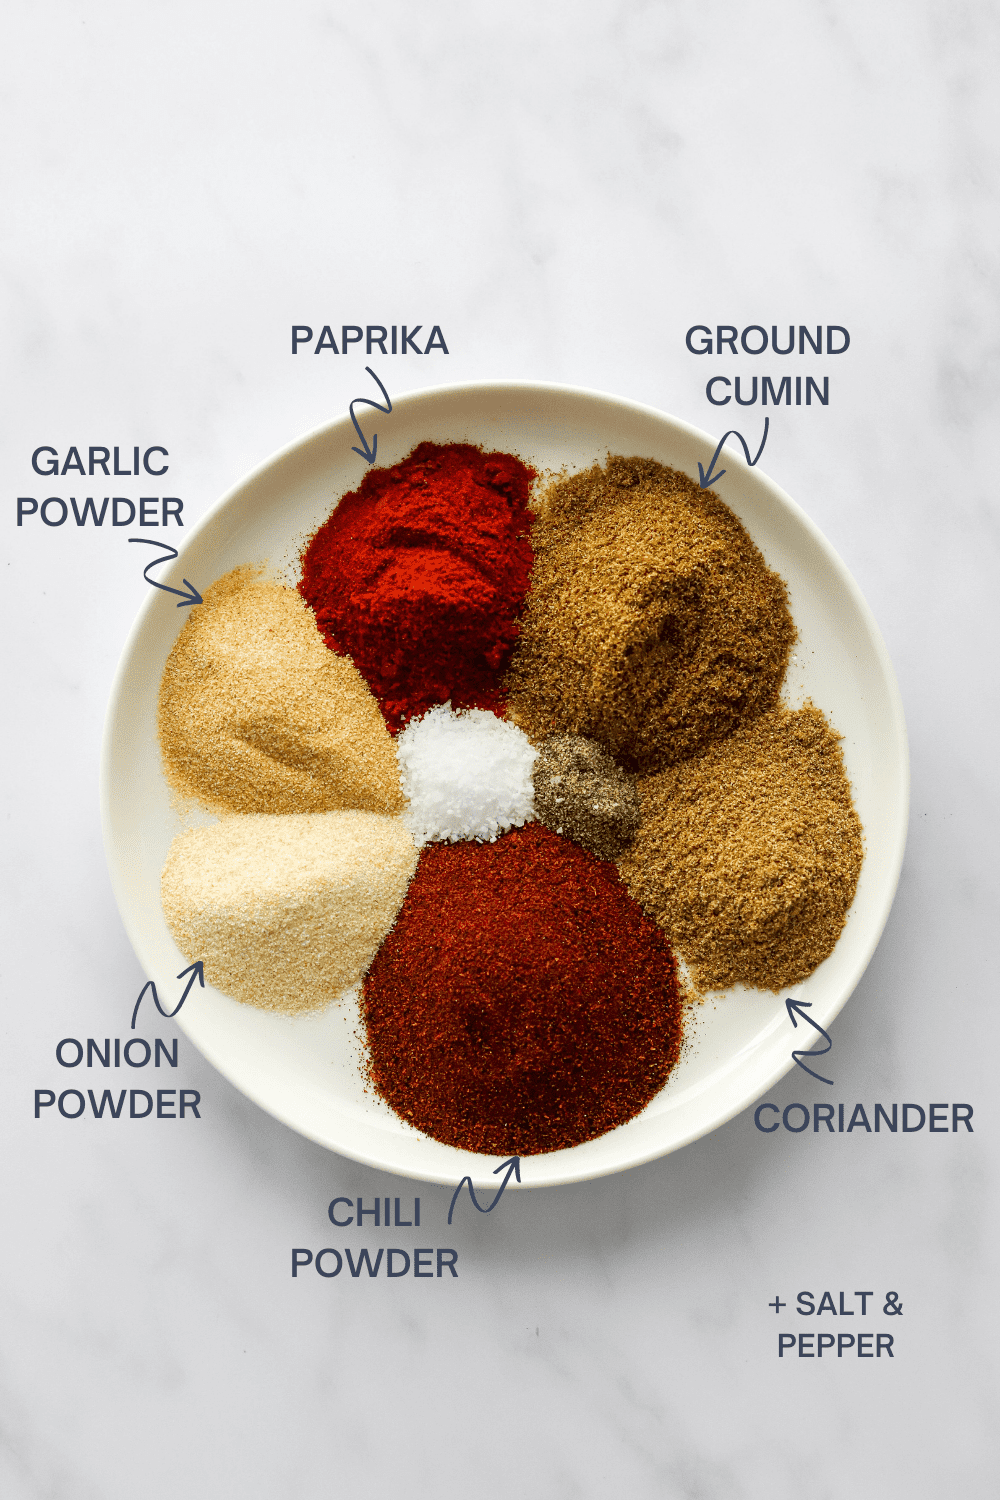 https://pinchmegood.com/wp-content/uploads/2022/03/Gluten-Free-Taco-Seasoning-Ingredients-With-labels.png